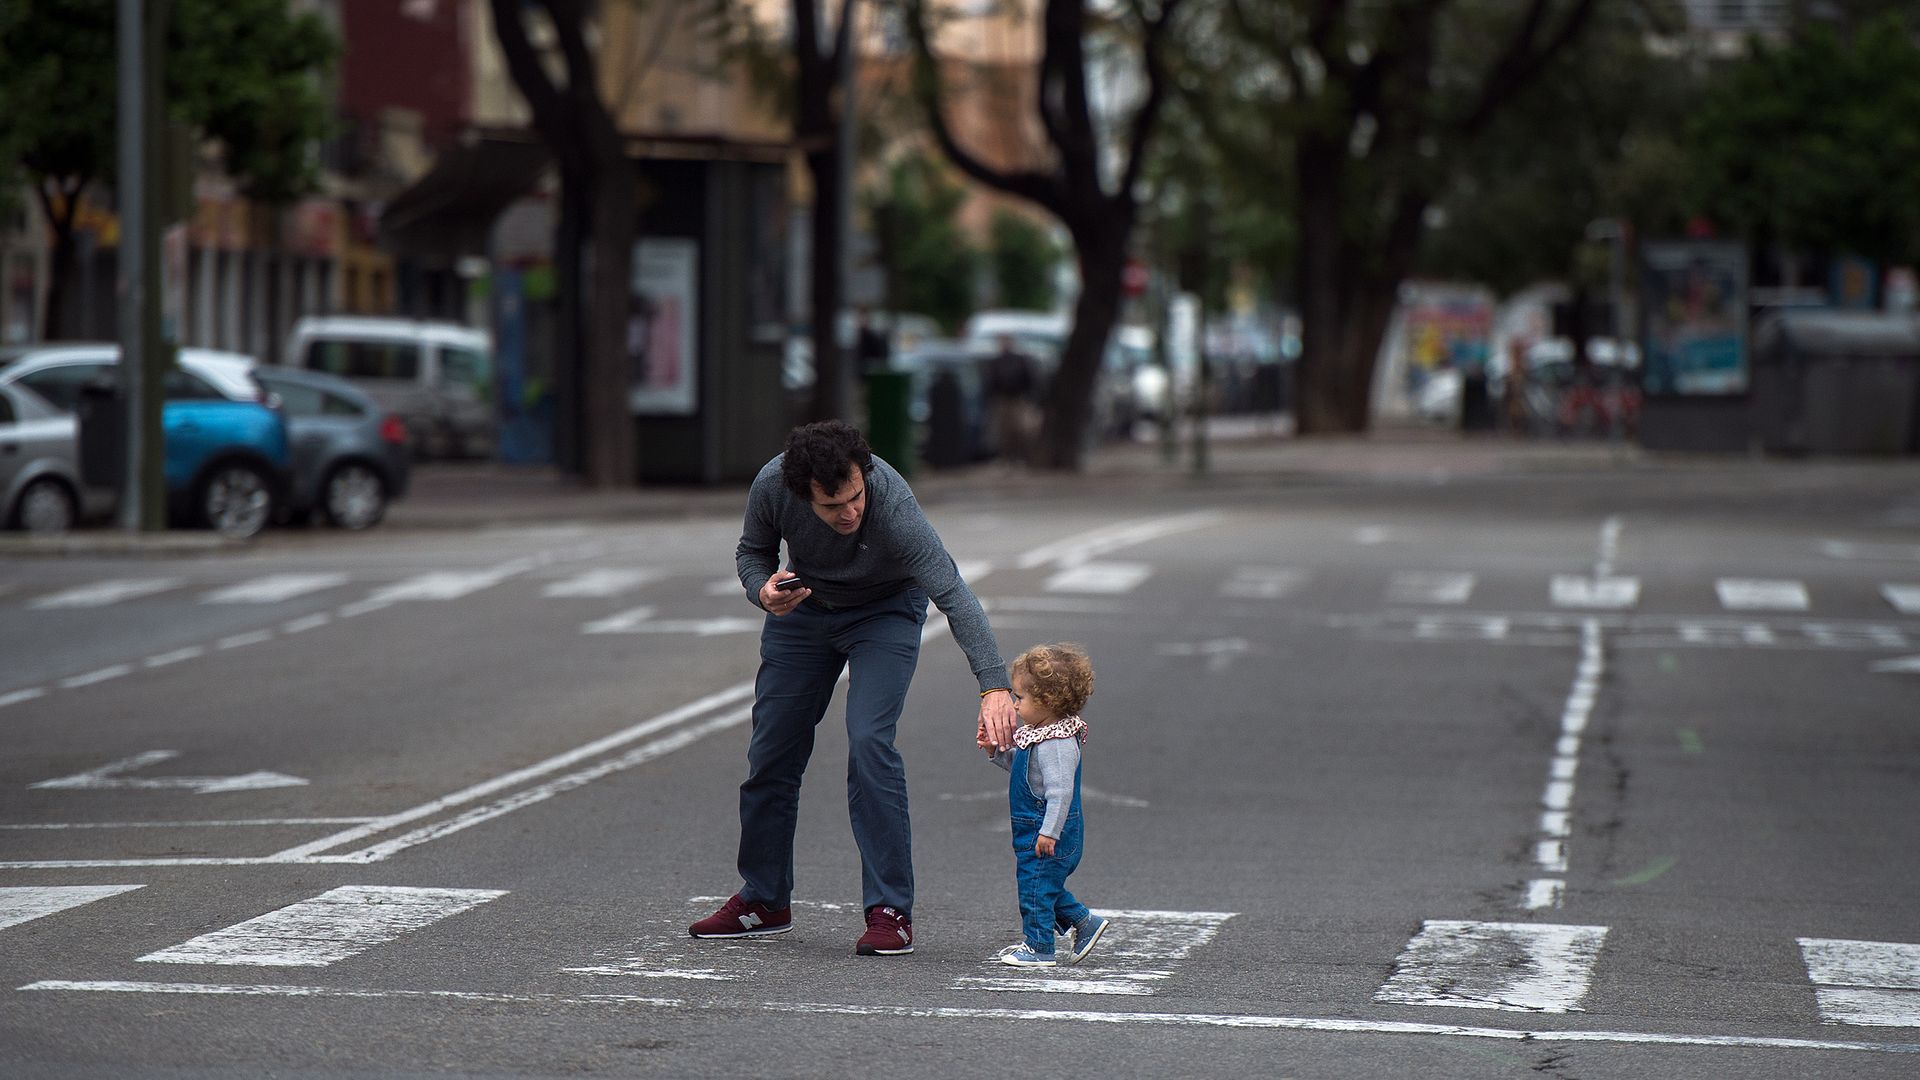 In this image, a man helps a toddler cross the street on a crosswalk in Spain